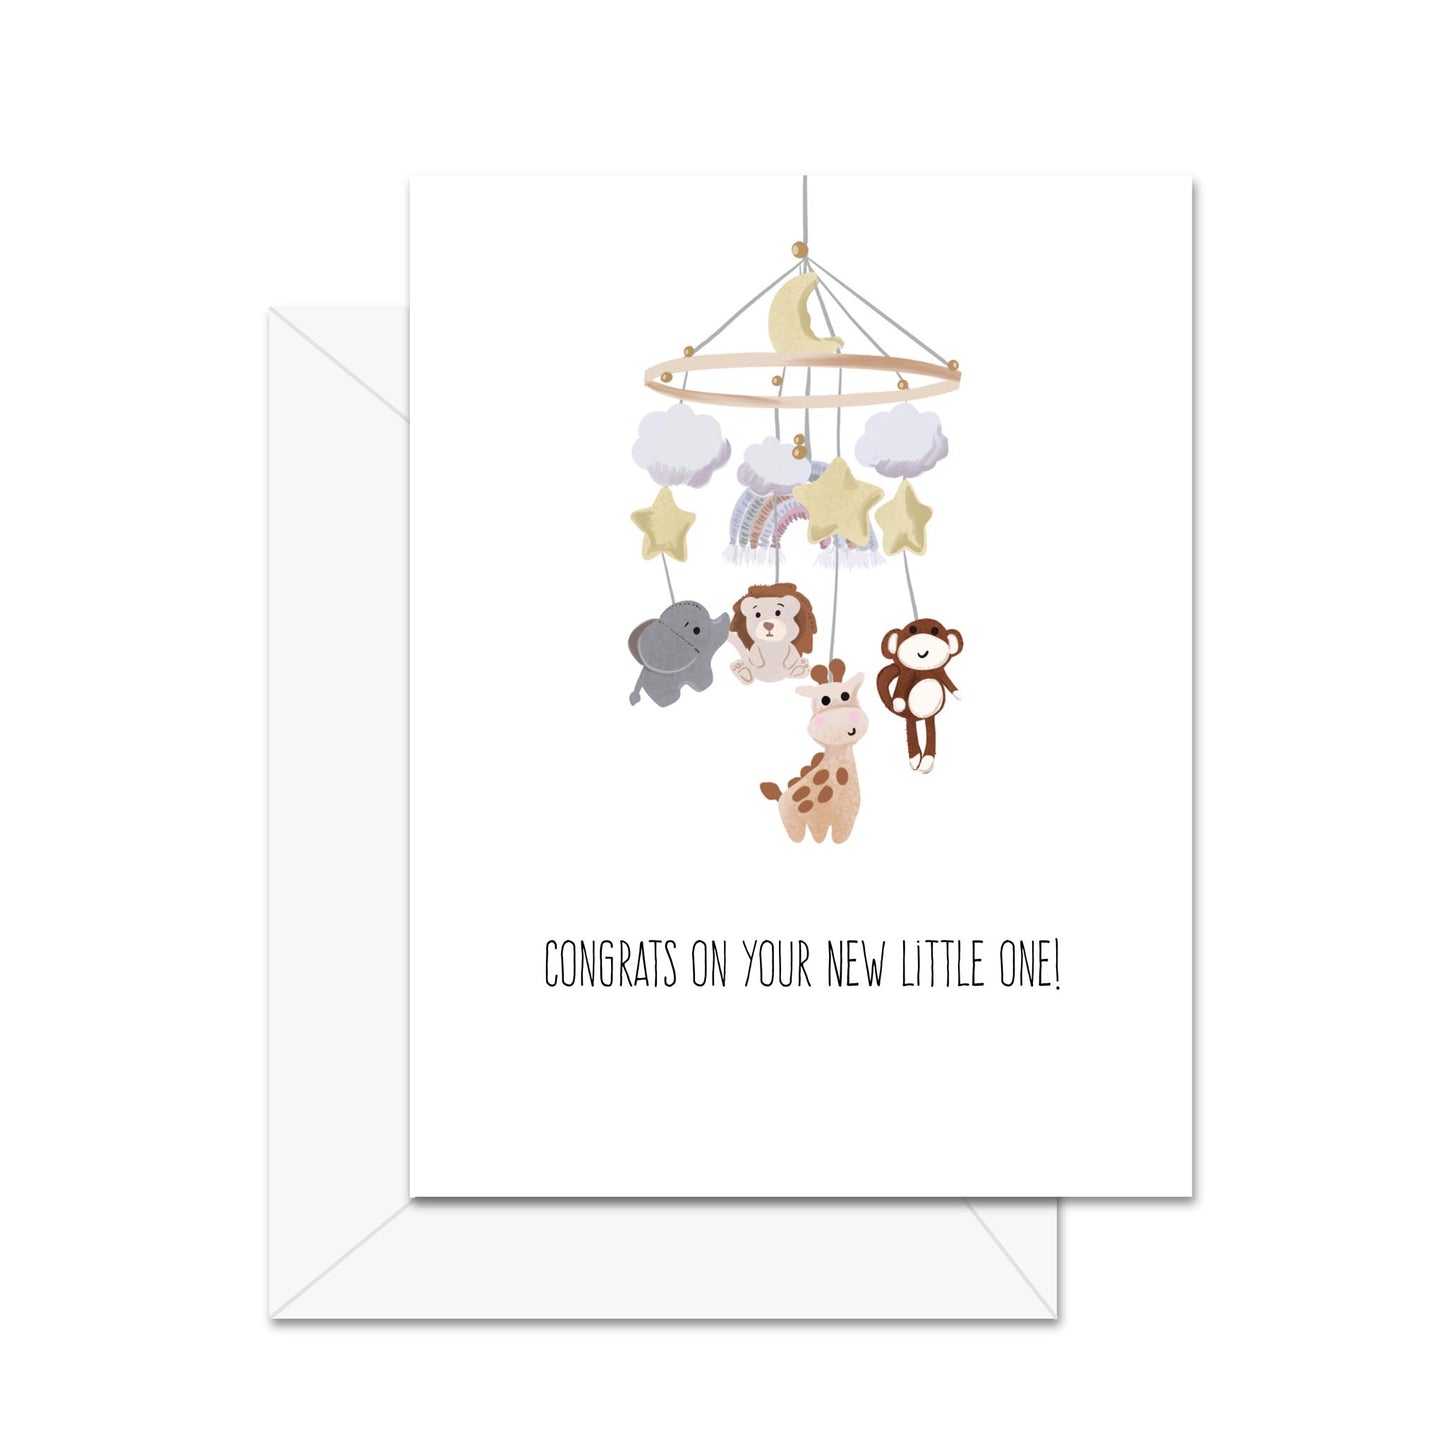 Congrats On Your New Little One! - Greeting Card